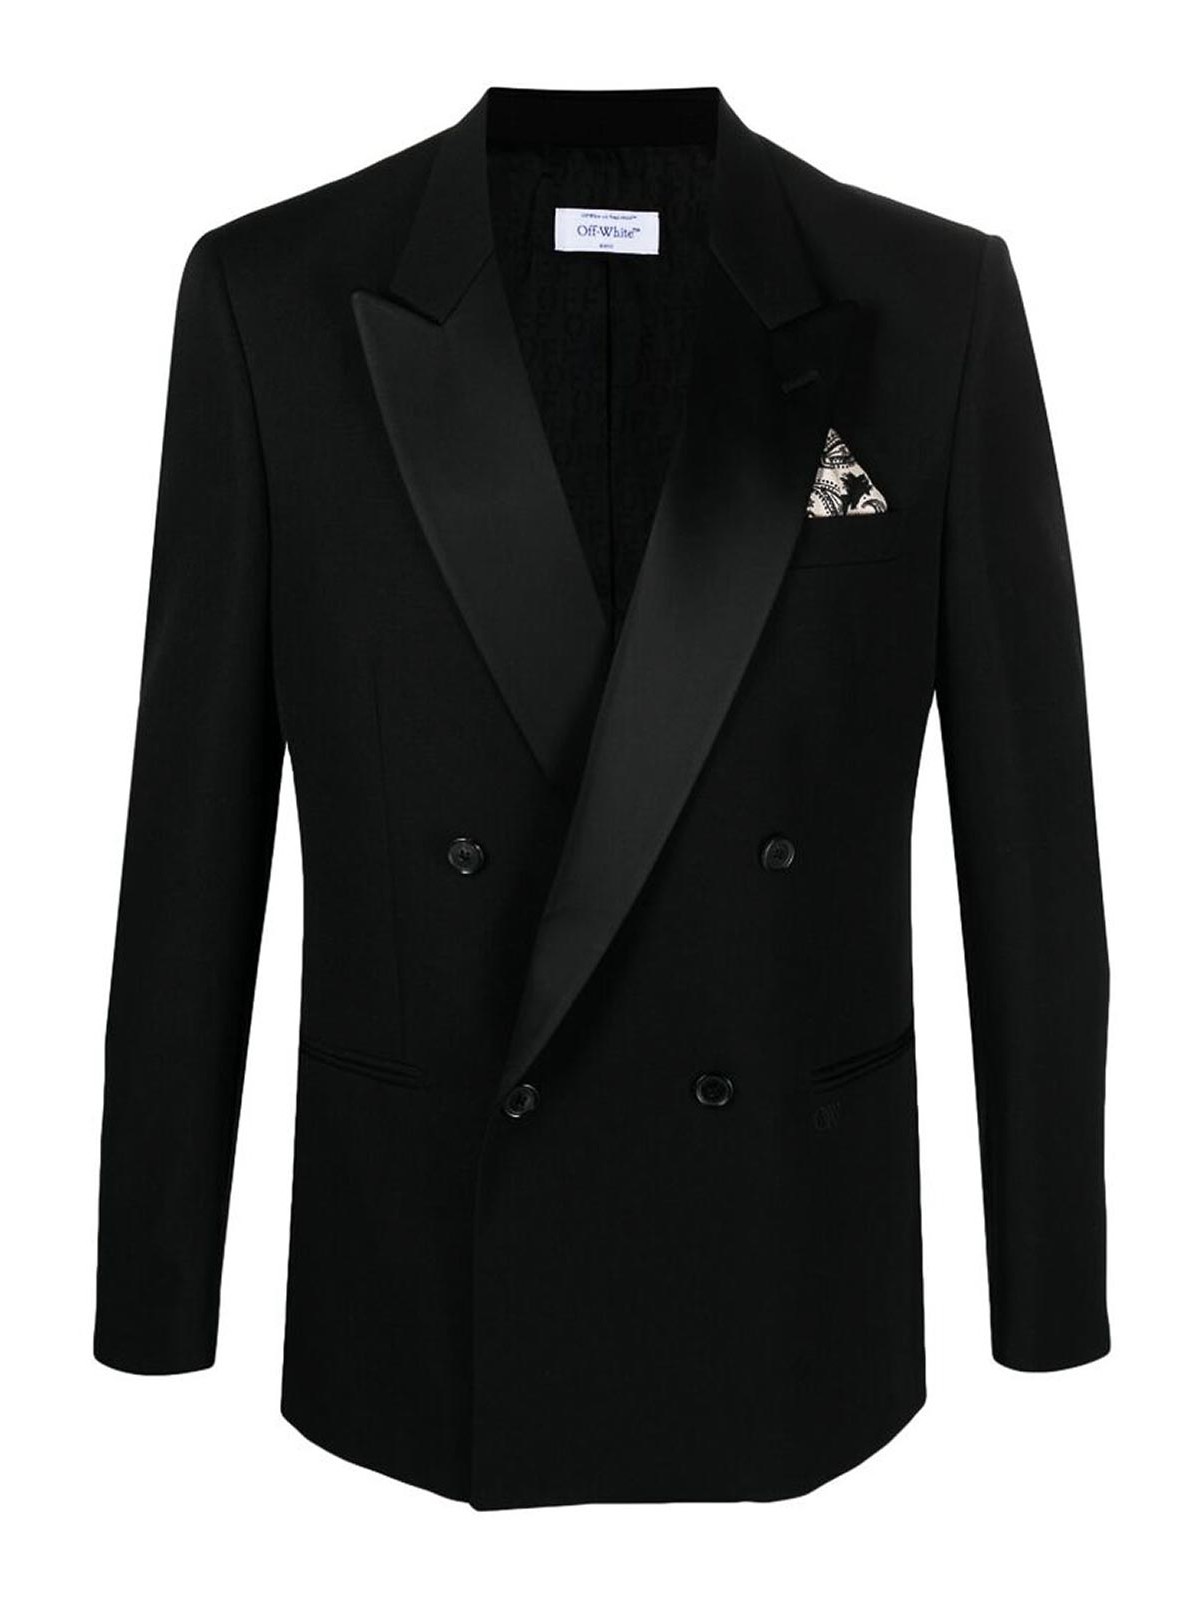 Shop Off-white Black Double-breasted Blazer